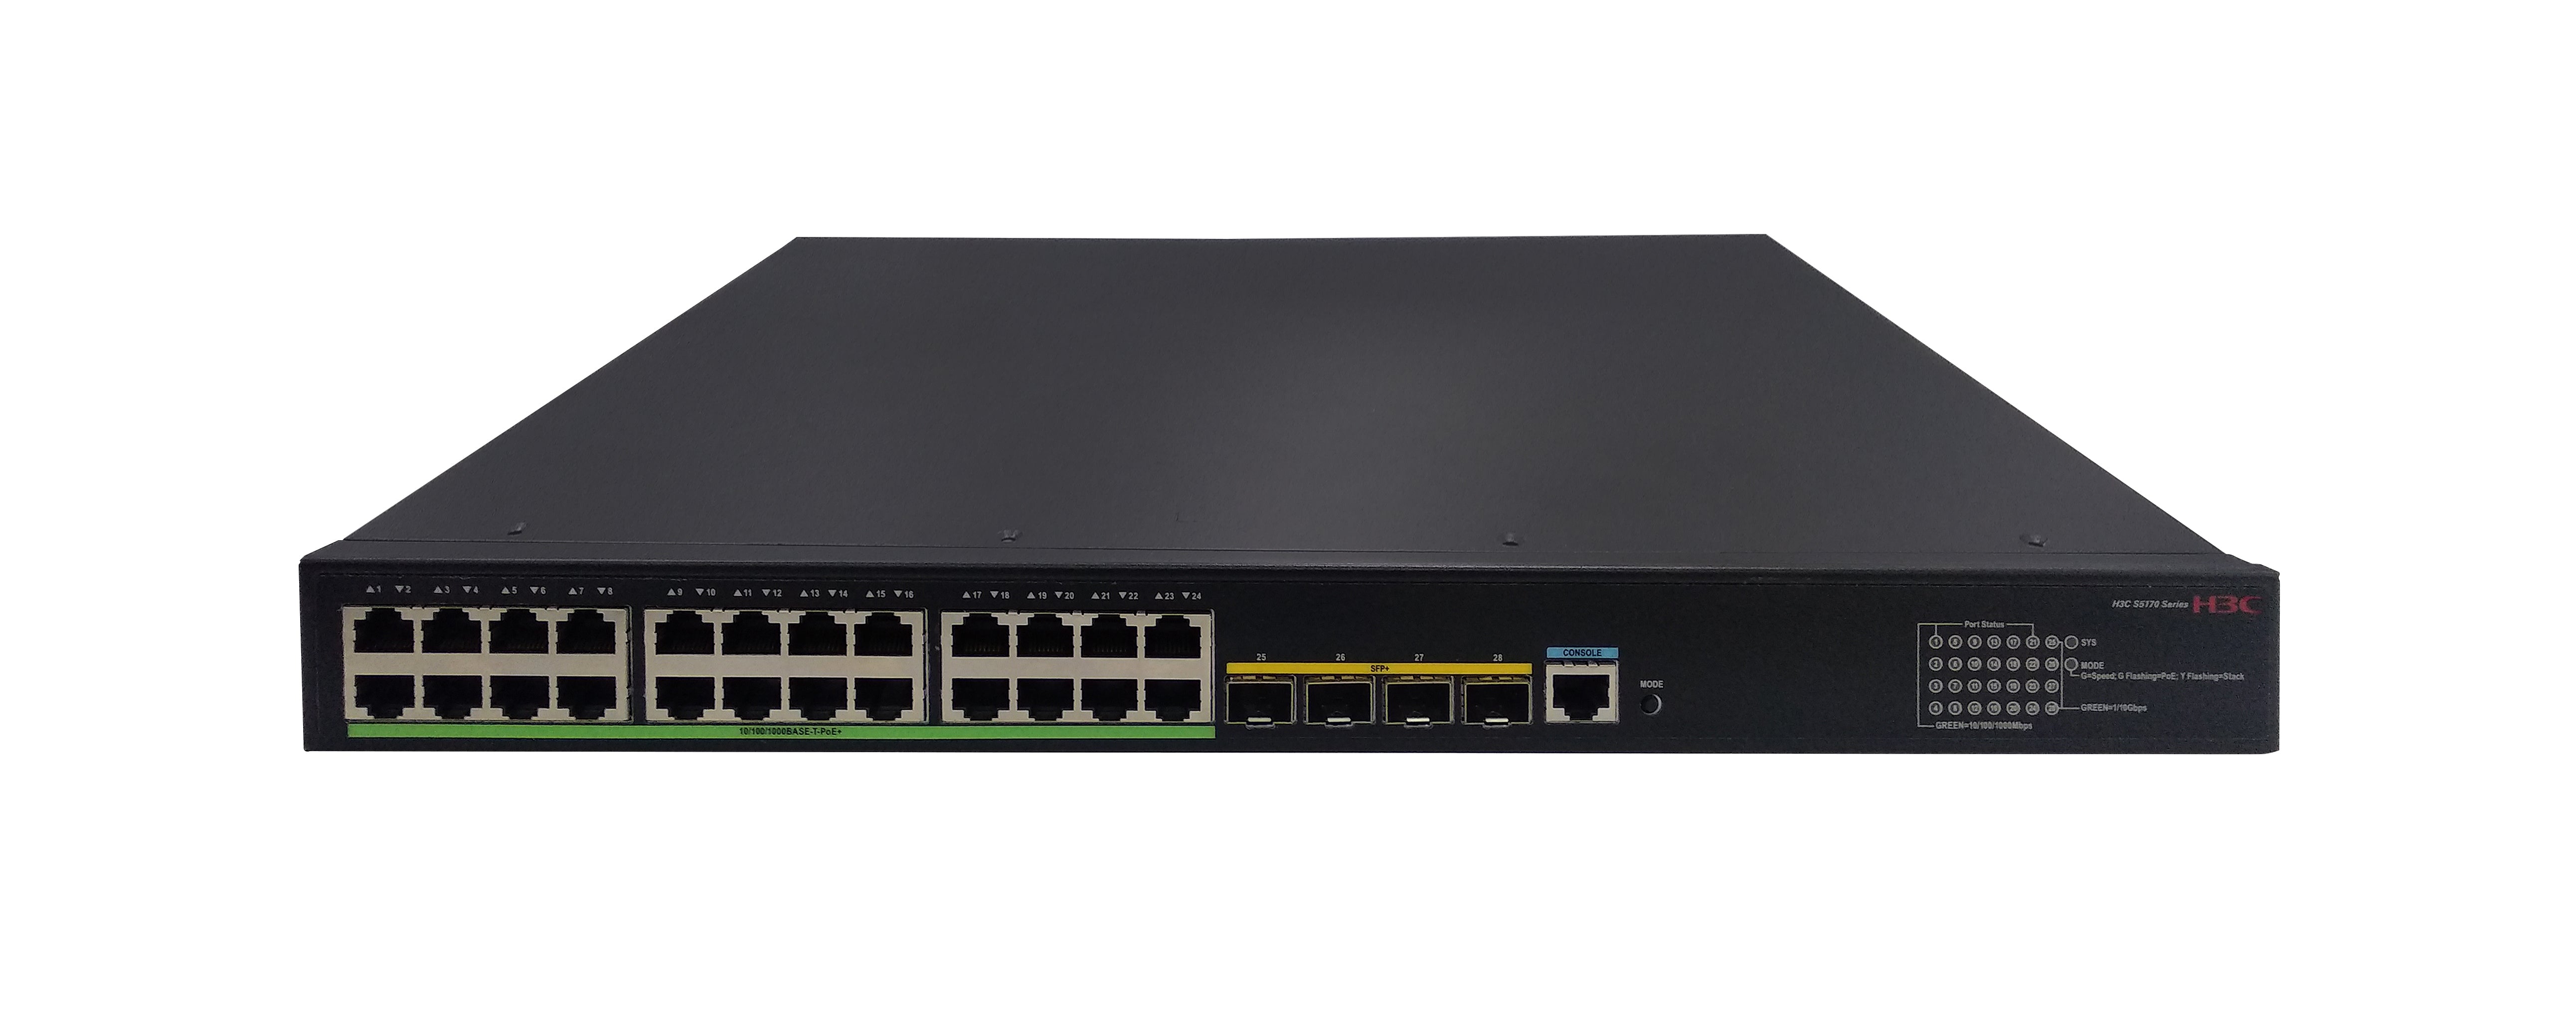 H3C S5170-28S-HPWR-EI L2 Ethernet Switch